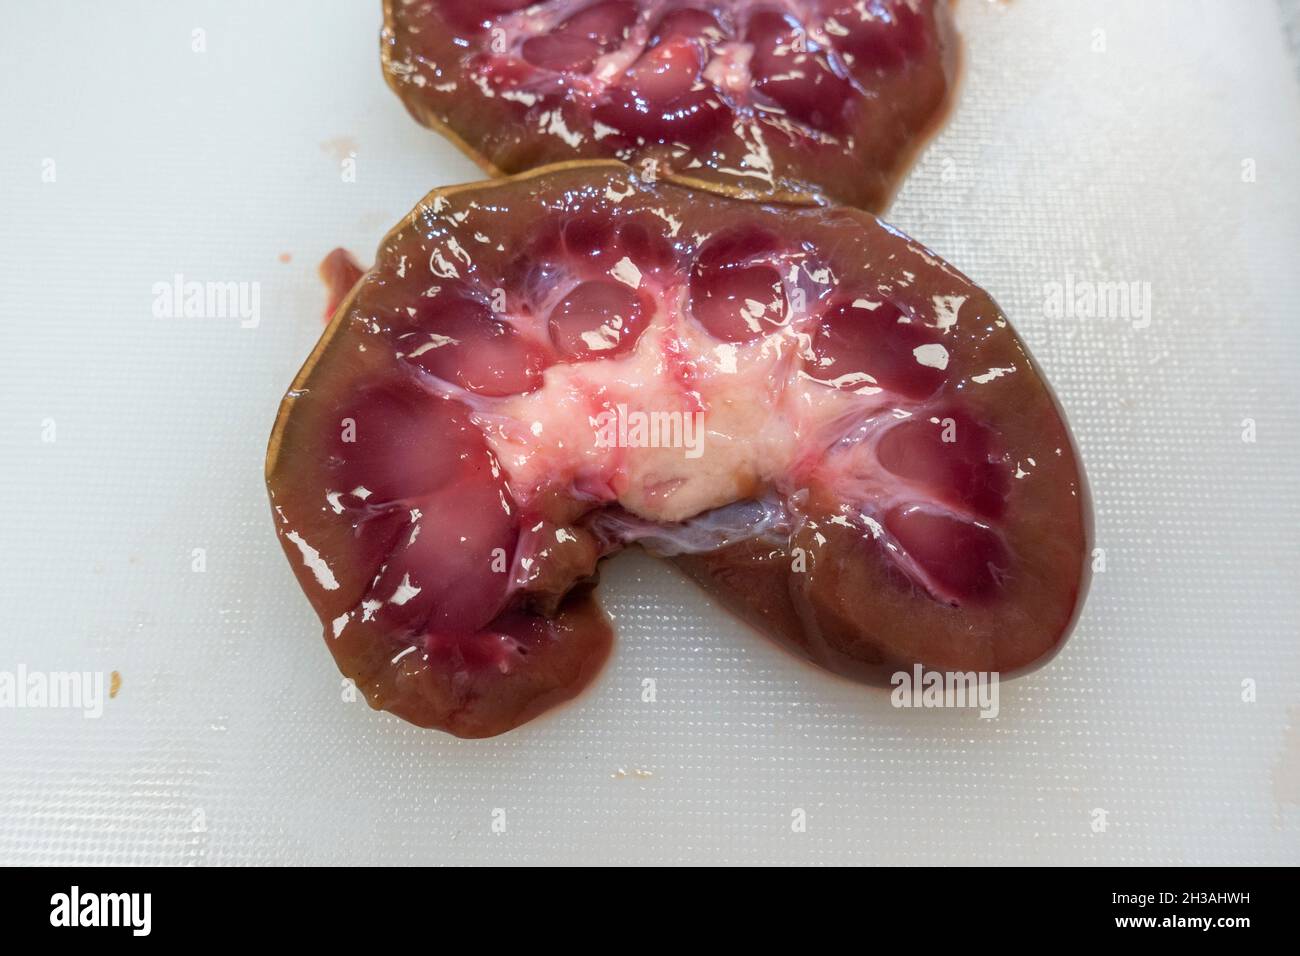 Display of a dissected lambs kidney following a dissection in a UK school. Stock Photo